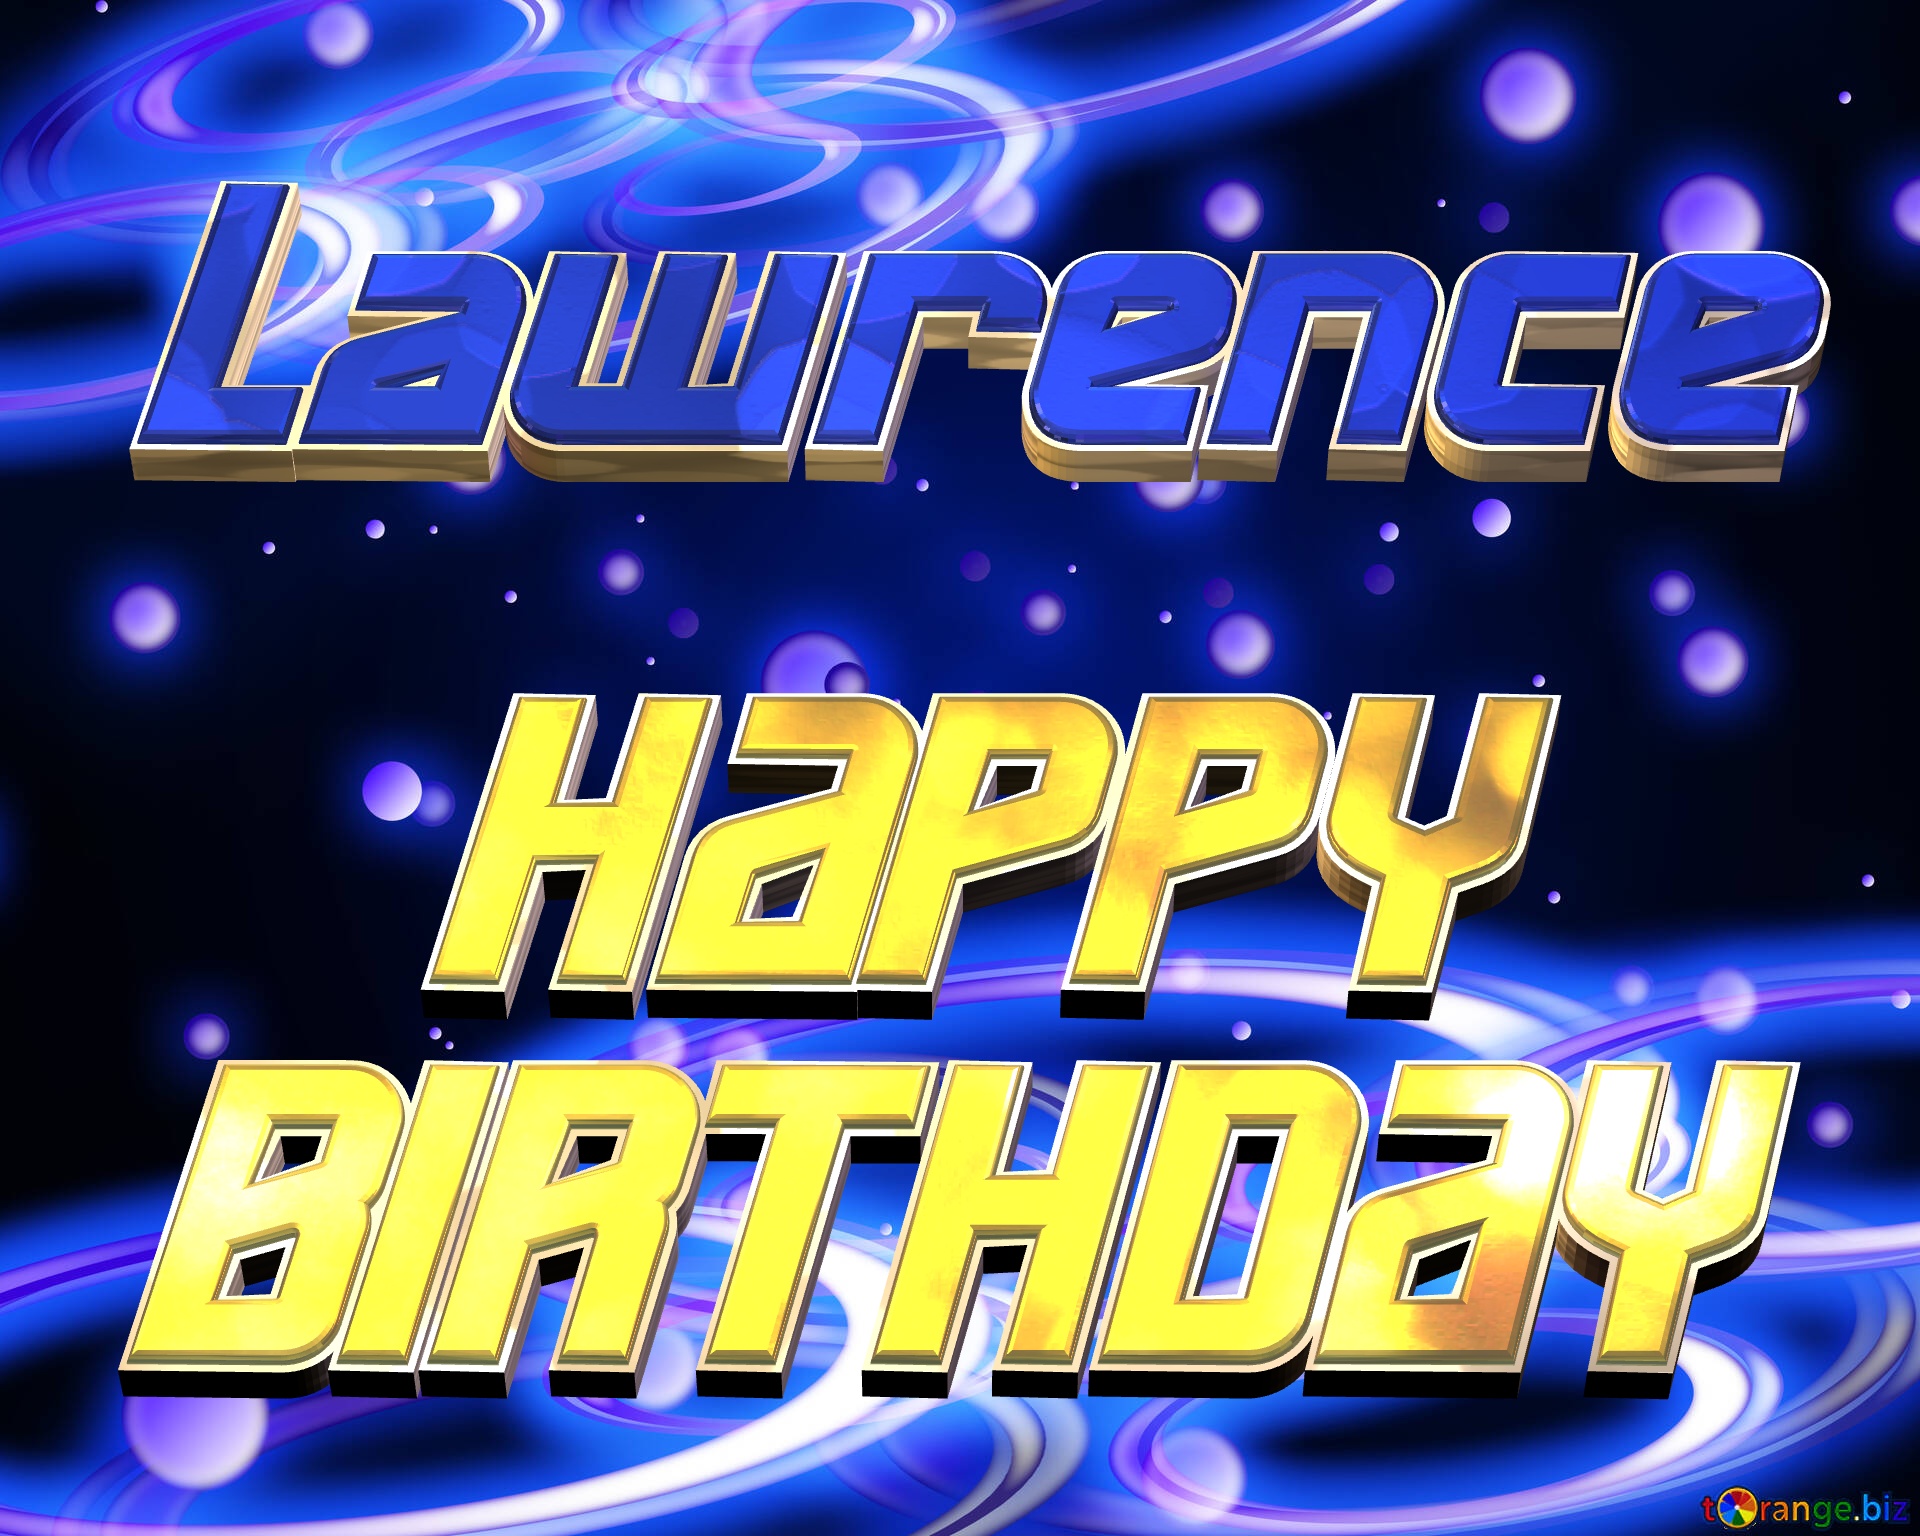 Lawrence Space Happy Birthday! Technology background №54919